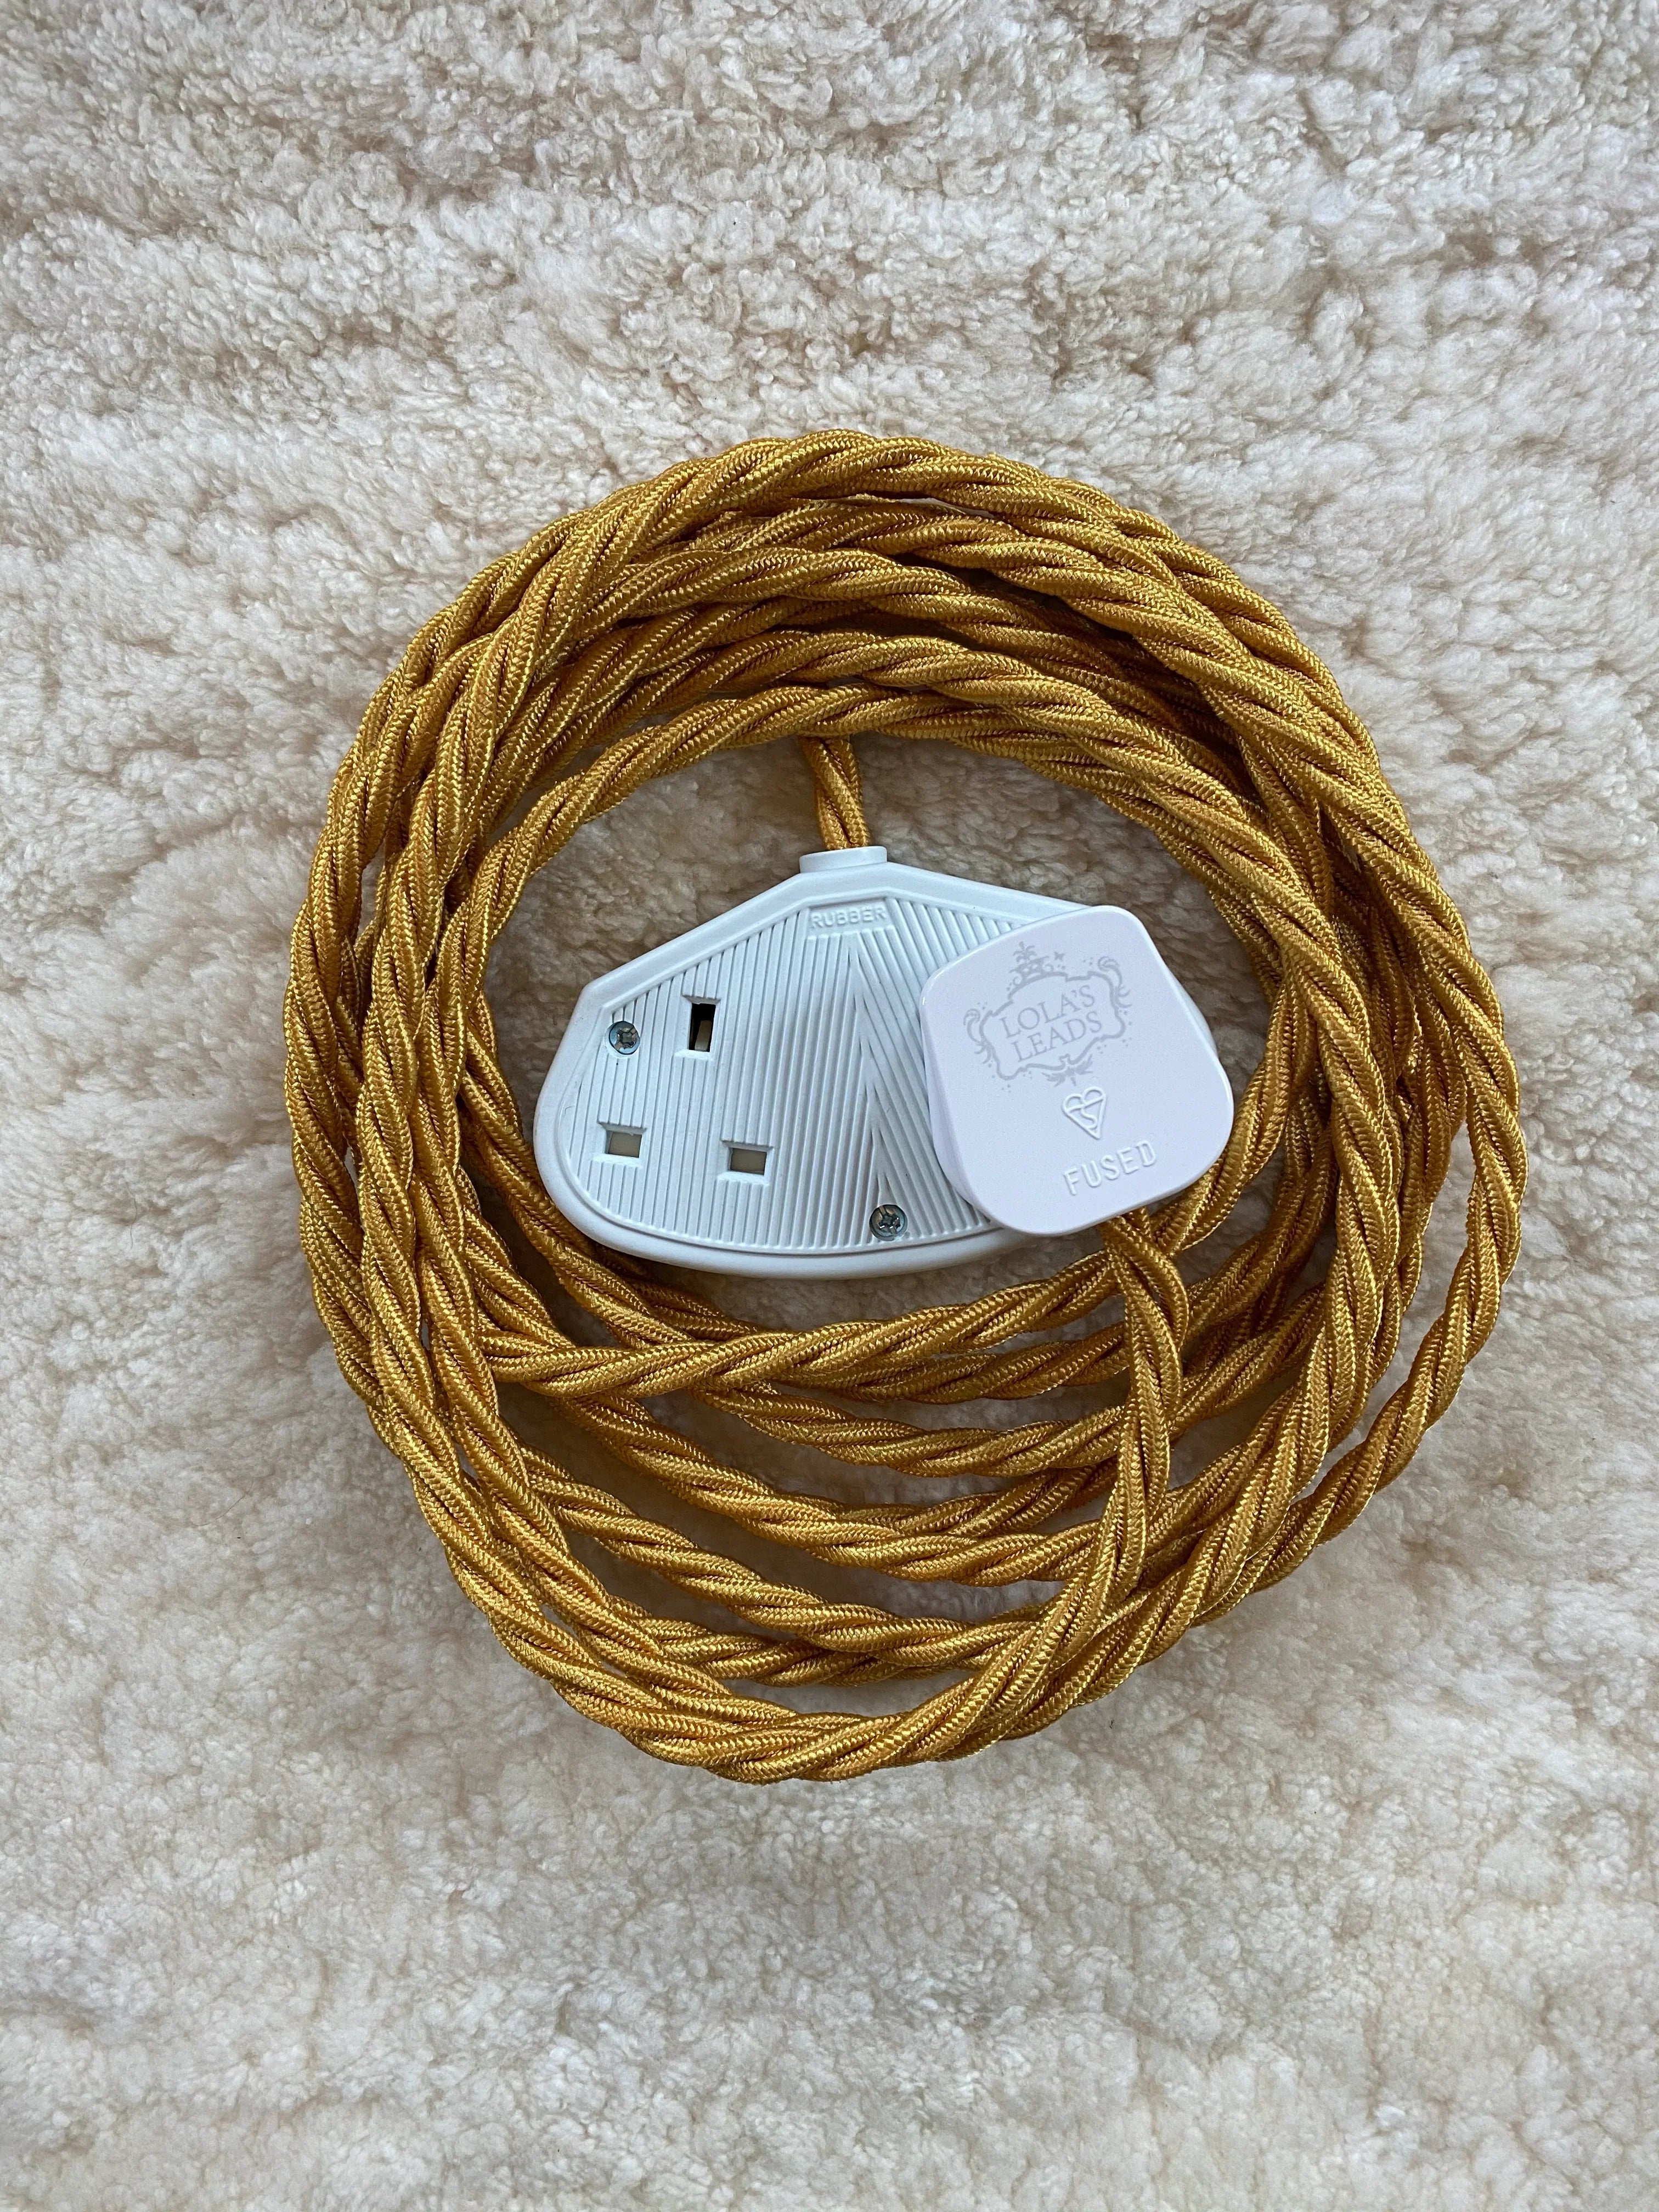 Gold & White - Lola's Leads Fabric Extension Cable